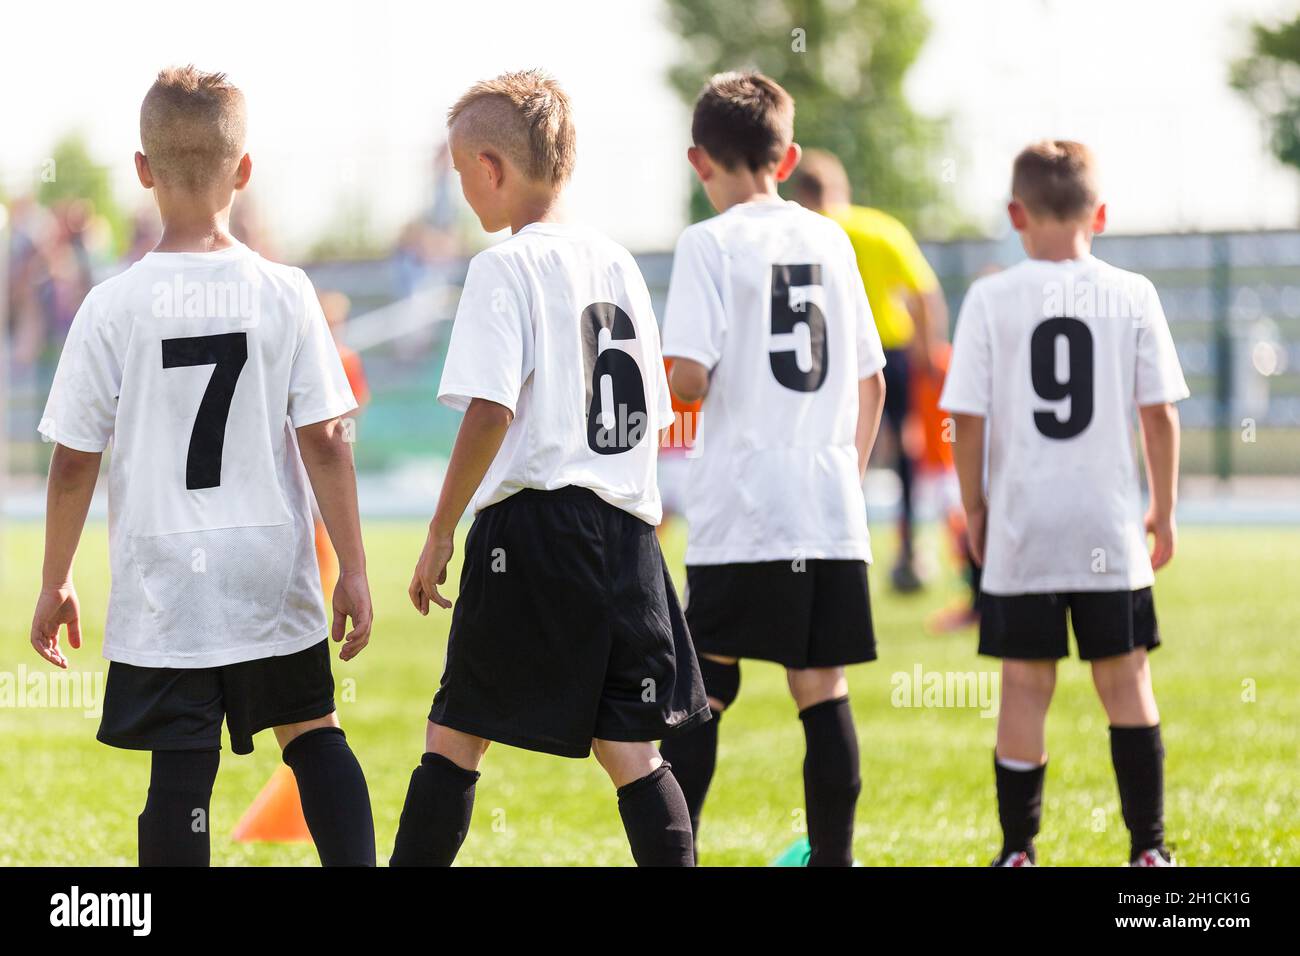 Football Boys Standing on a Sideline on Football Pitch. Kids Playing Football School Tournament on a Summer Day. Kids in White Soccer Shirts with Blac Stock Photo